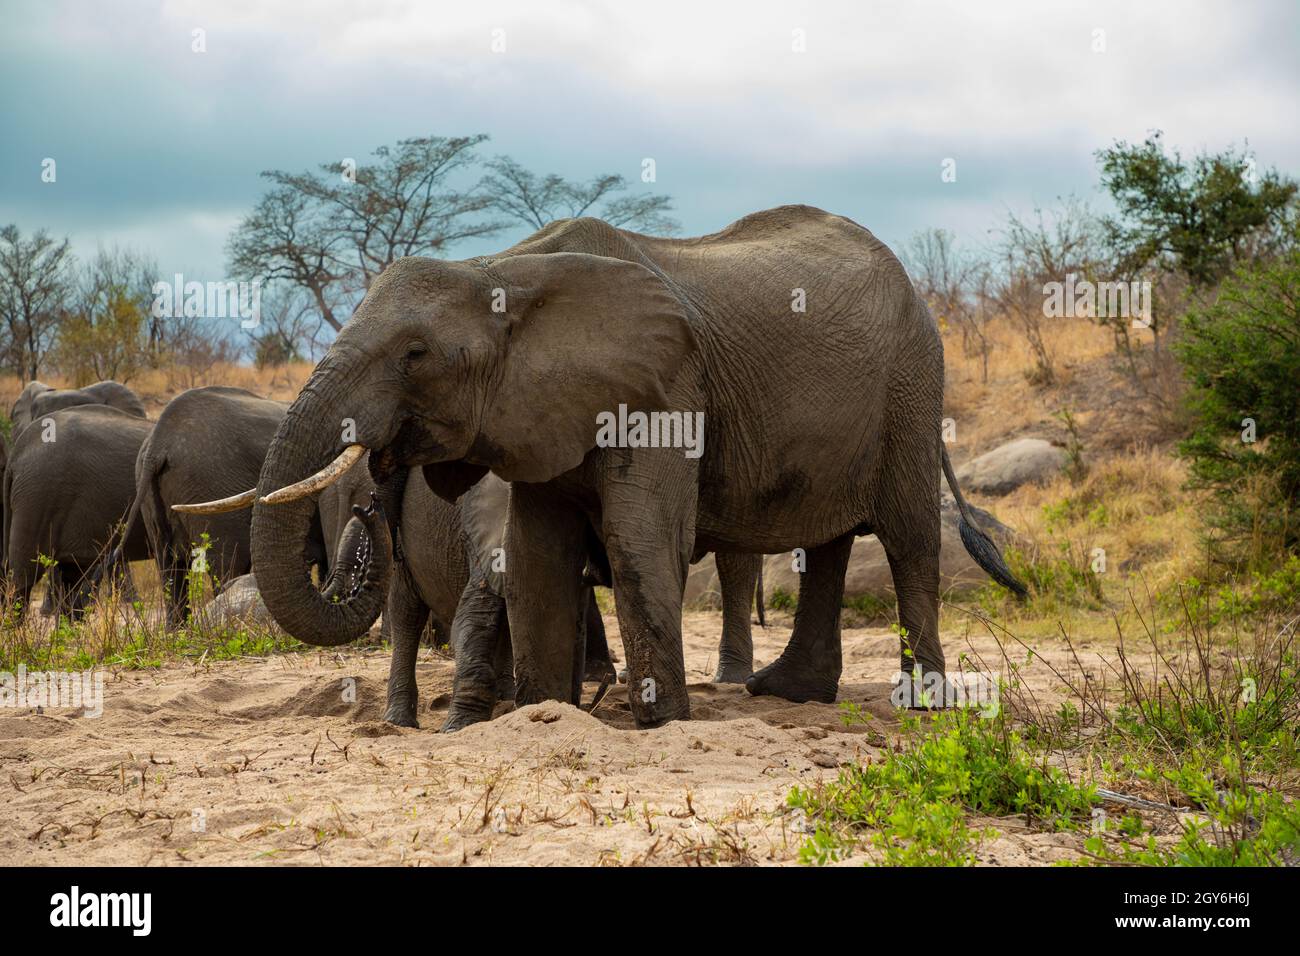 Elephant drinking water in the African bush. Stock Photo